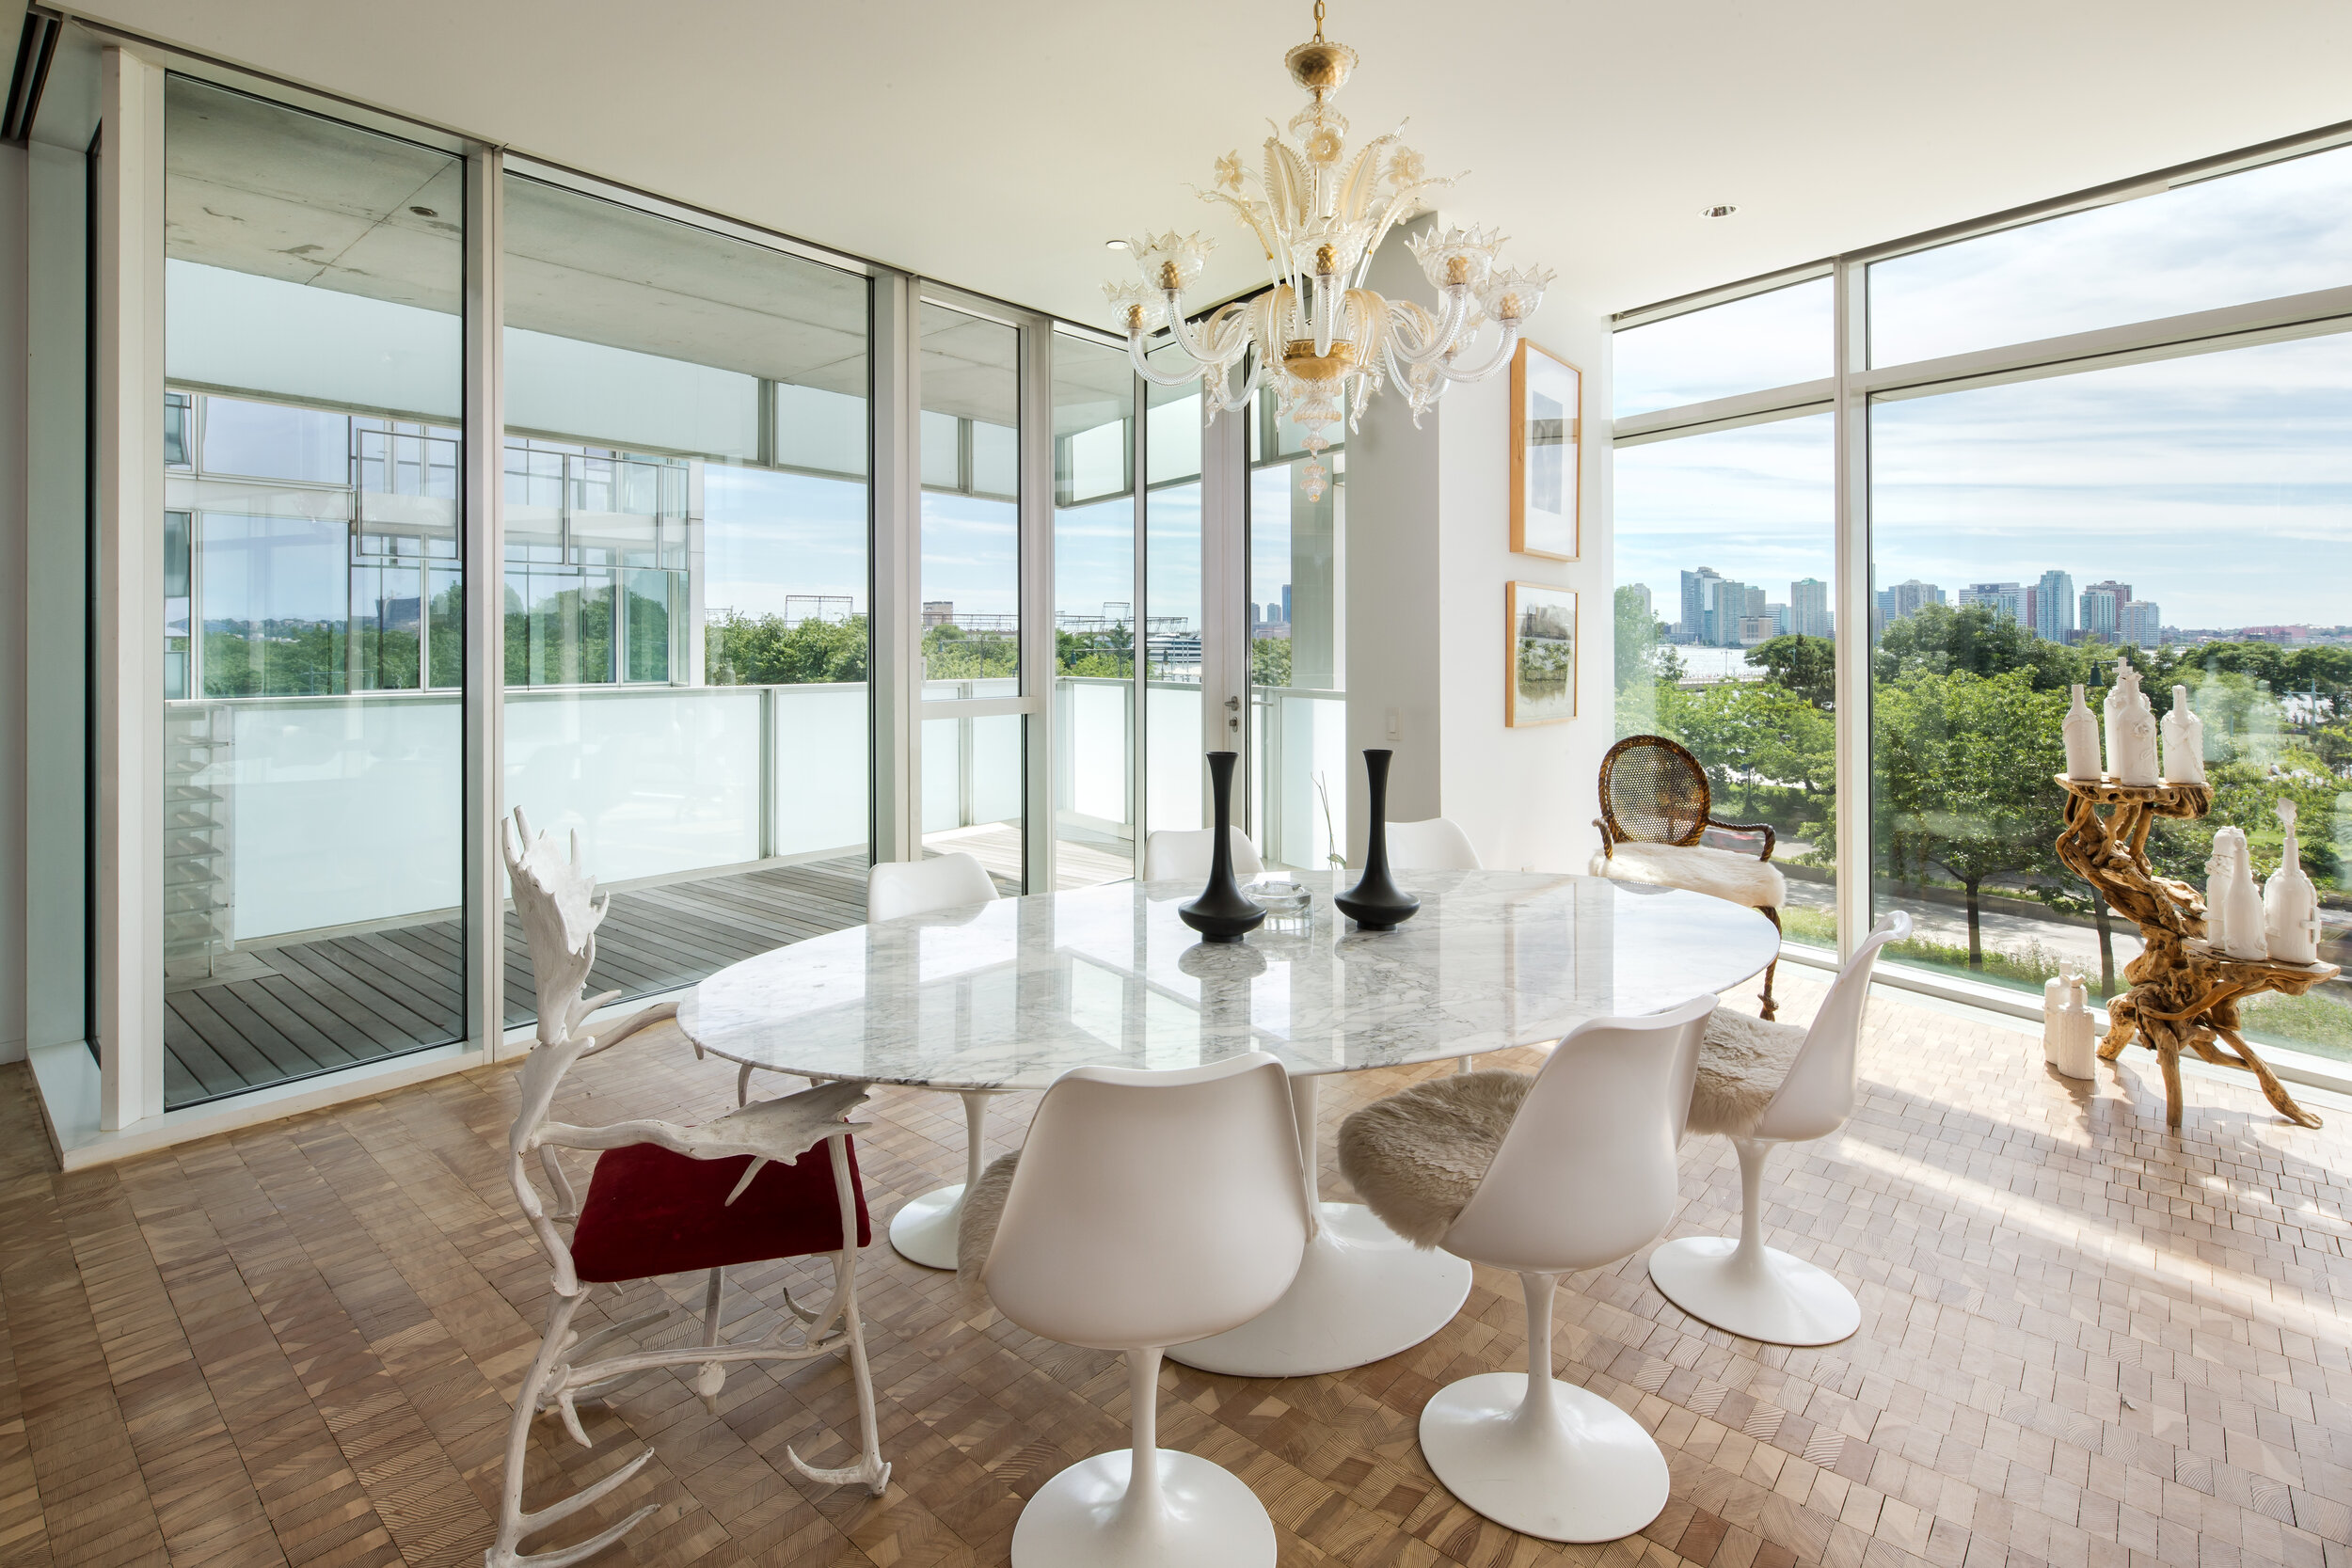  The tailor-made layout accommodates gracious living and entertaining, while maximizing light and offering an abundance of wall space for art. The great room on the waterfront features 10' floor-to-ceiling windows that showcase 43 feet of expansive v